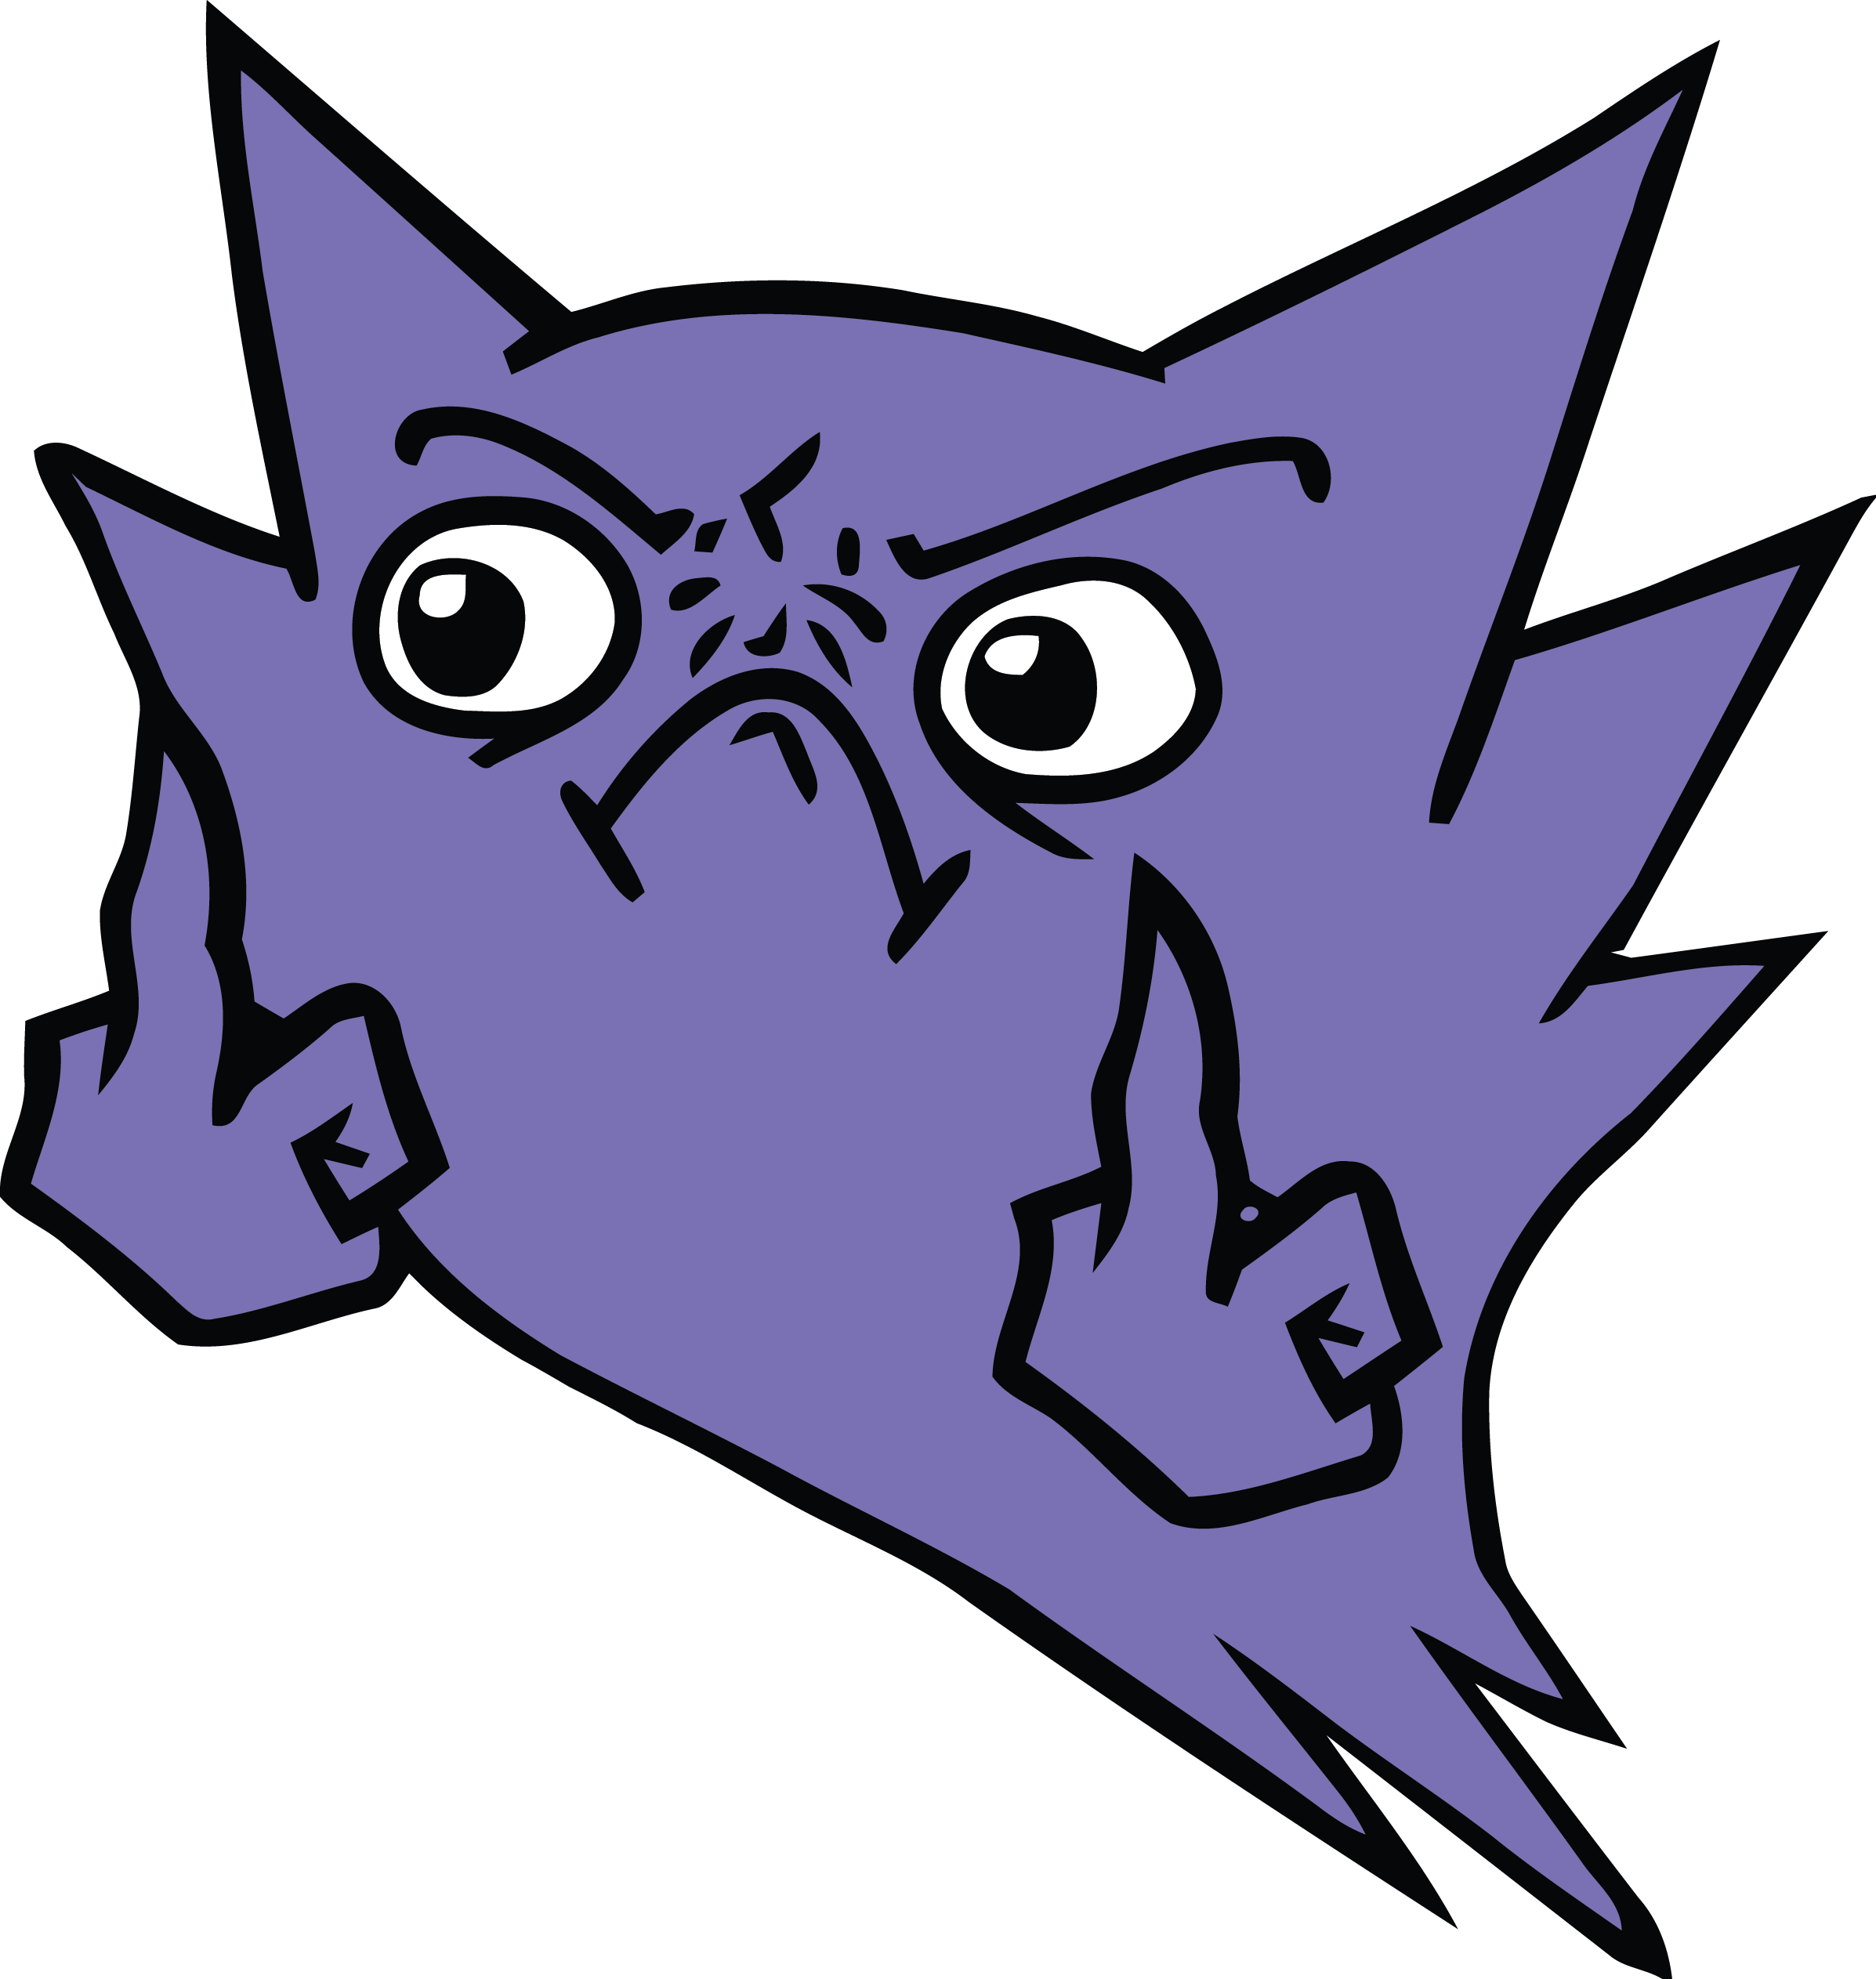 Thought R/pokemon Might Like This Vectored For Making - Haunter Used Mean Look (2394x2526)